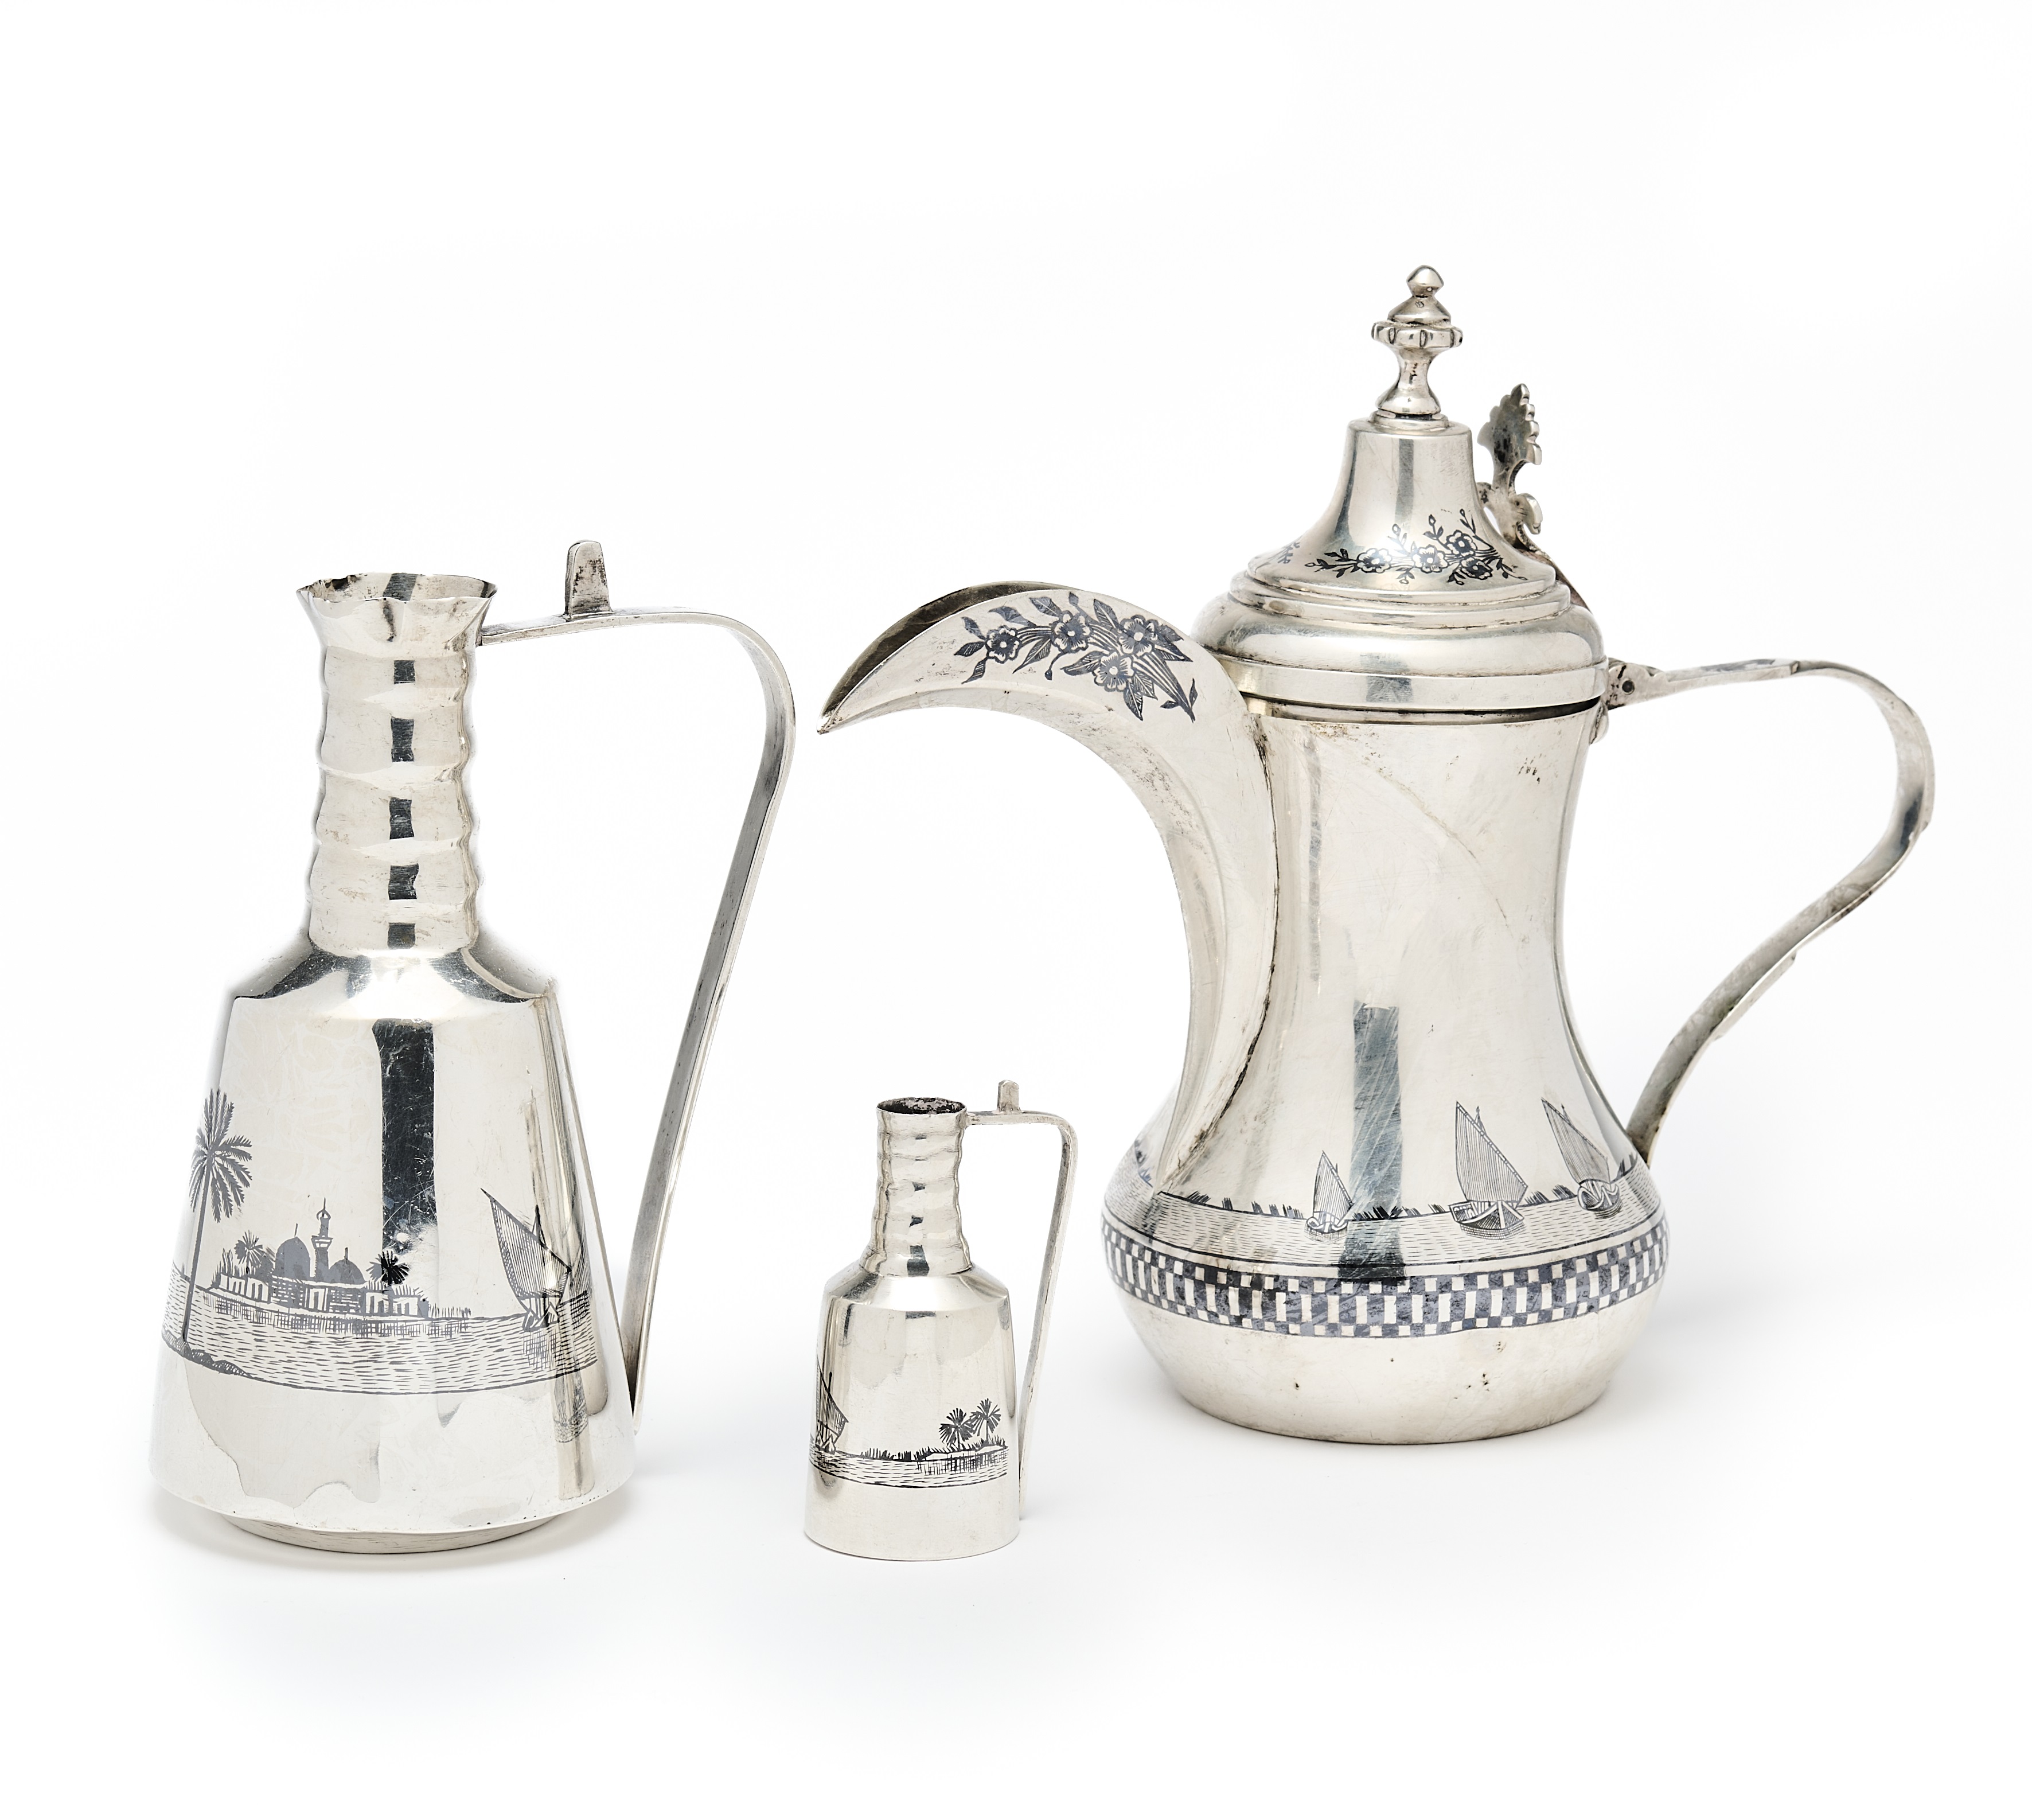 AN IRAQI COFFEE POT AND PAIR OF JUGS IN SIZES, PROBABLY BASRA OR OMARA, MID 20TH CENTURY